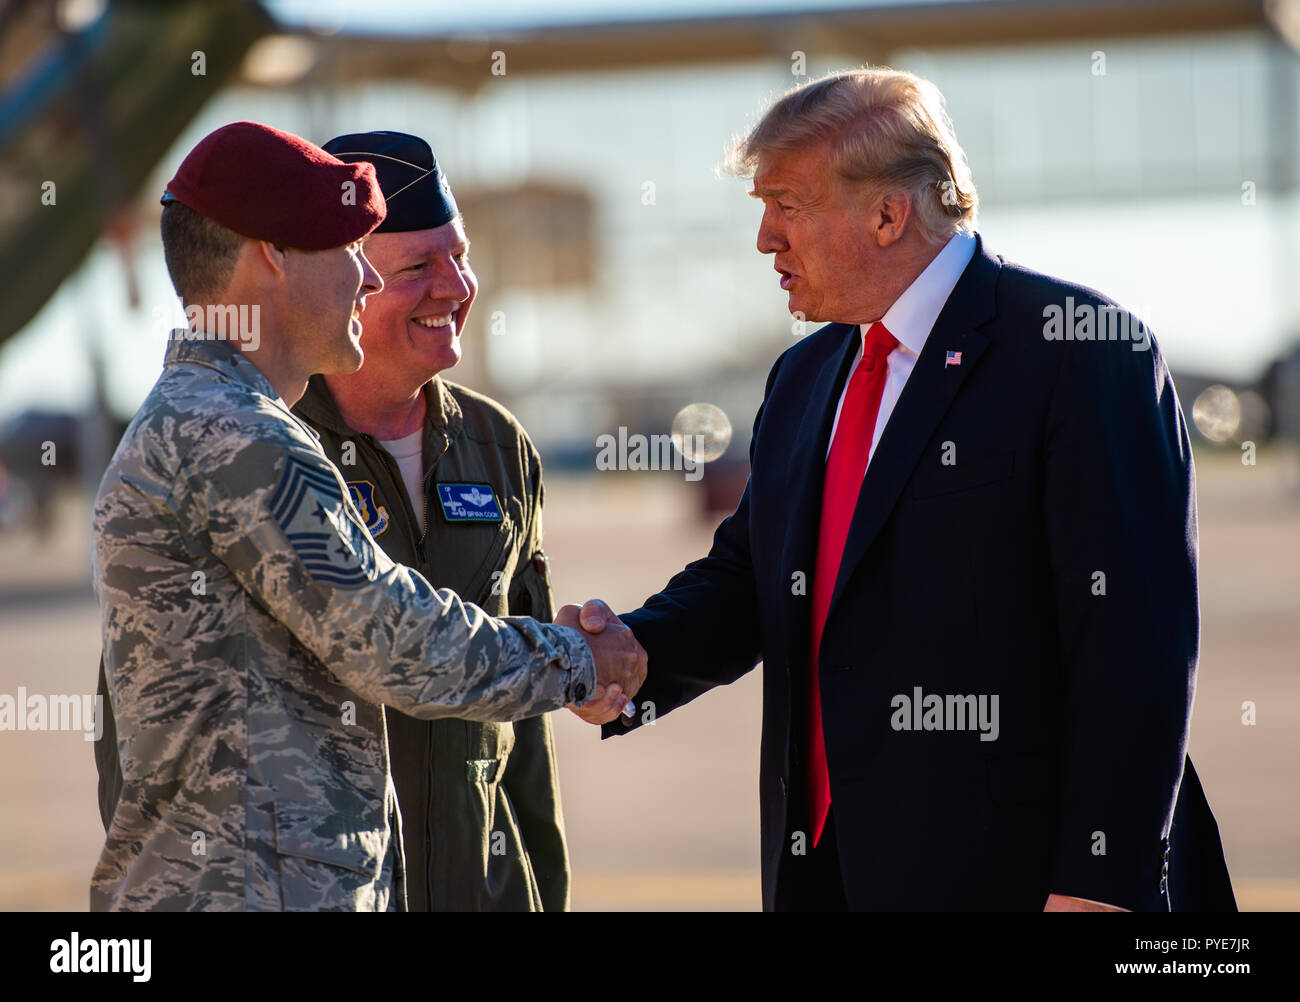 President Donald. J. Trump is greeted by Chief Master Sgt. Ronald Thompson, 56th Fighter Wing command chief, upon arrival to Luke Air Force Base, Ariz., Oct. 19, 2018.  Trump along with defense industry leaders visited Luke AFB to discuss current defense issues and to better understand Luke’s fighter training mission. (U.S. Air Force photo by Senior Airman Alexander Cook) Stock Photo